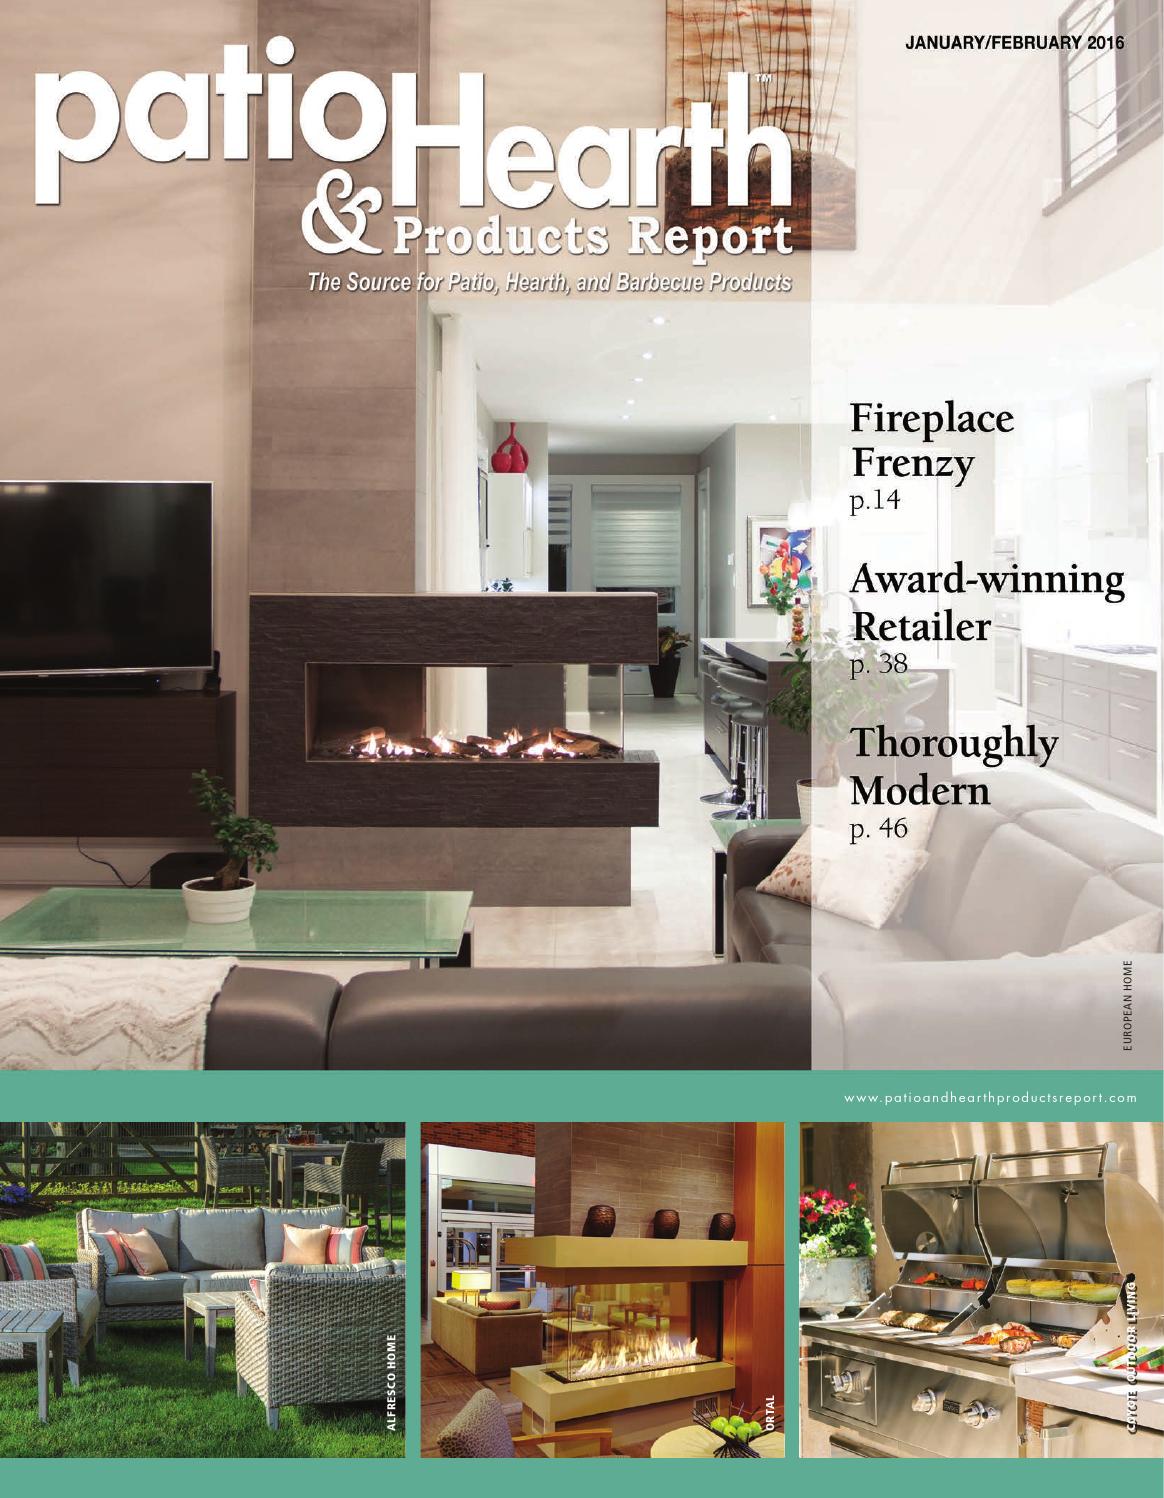 Georgetown Fireplace and Patios Elegant Patio & Hearth Product Report January February 2016 by